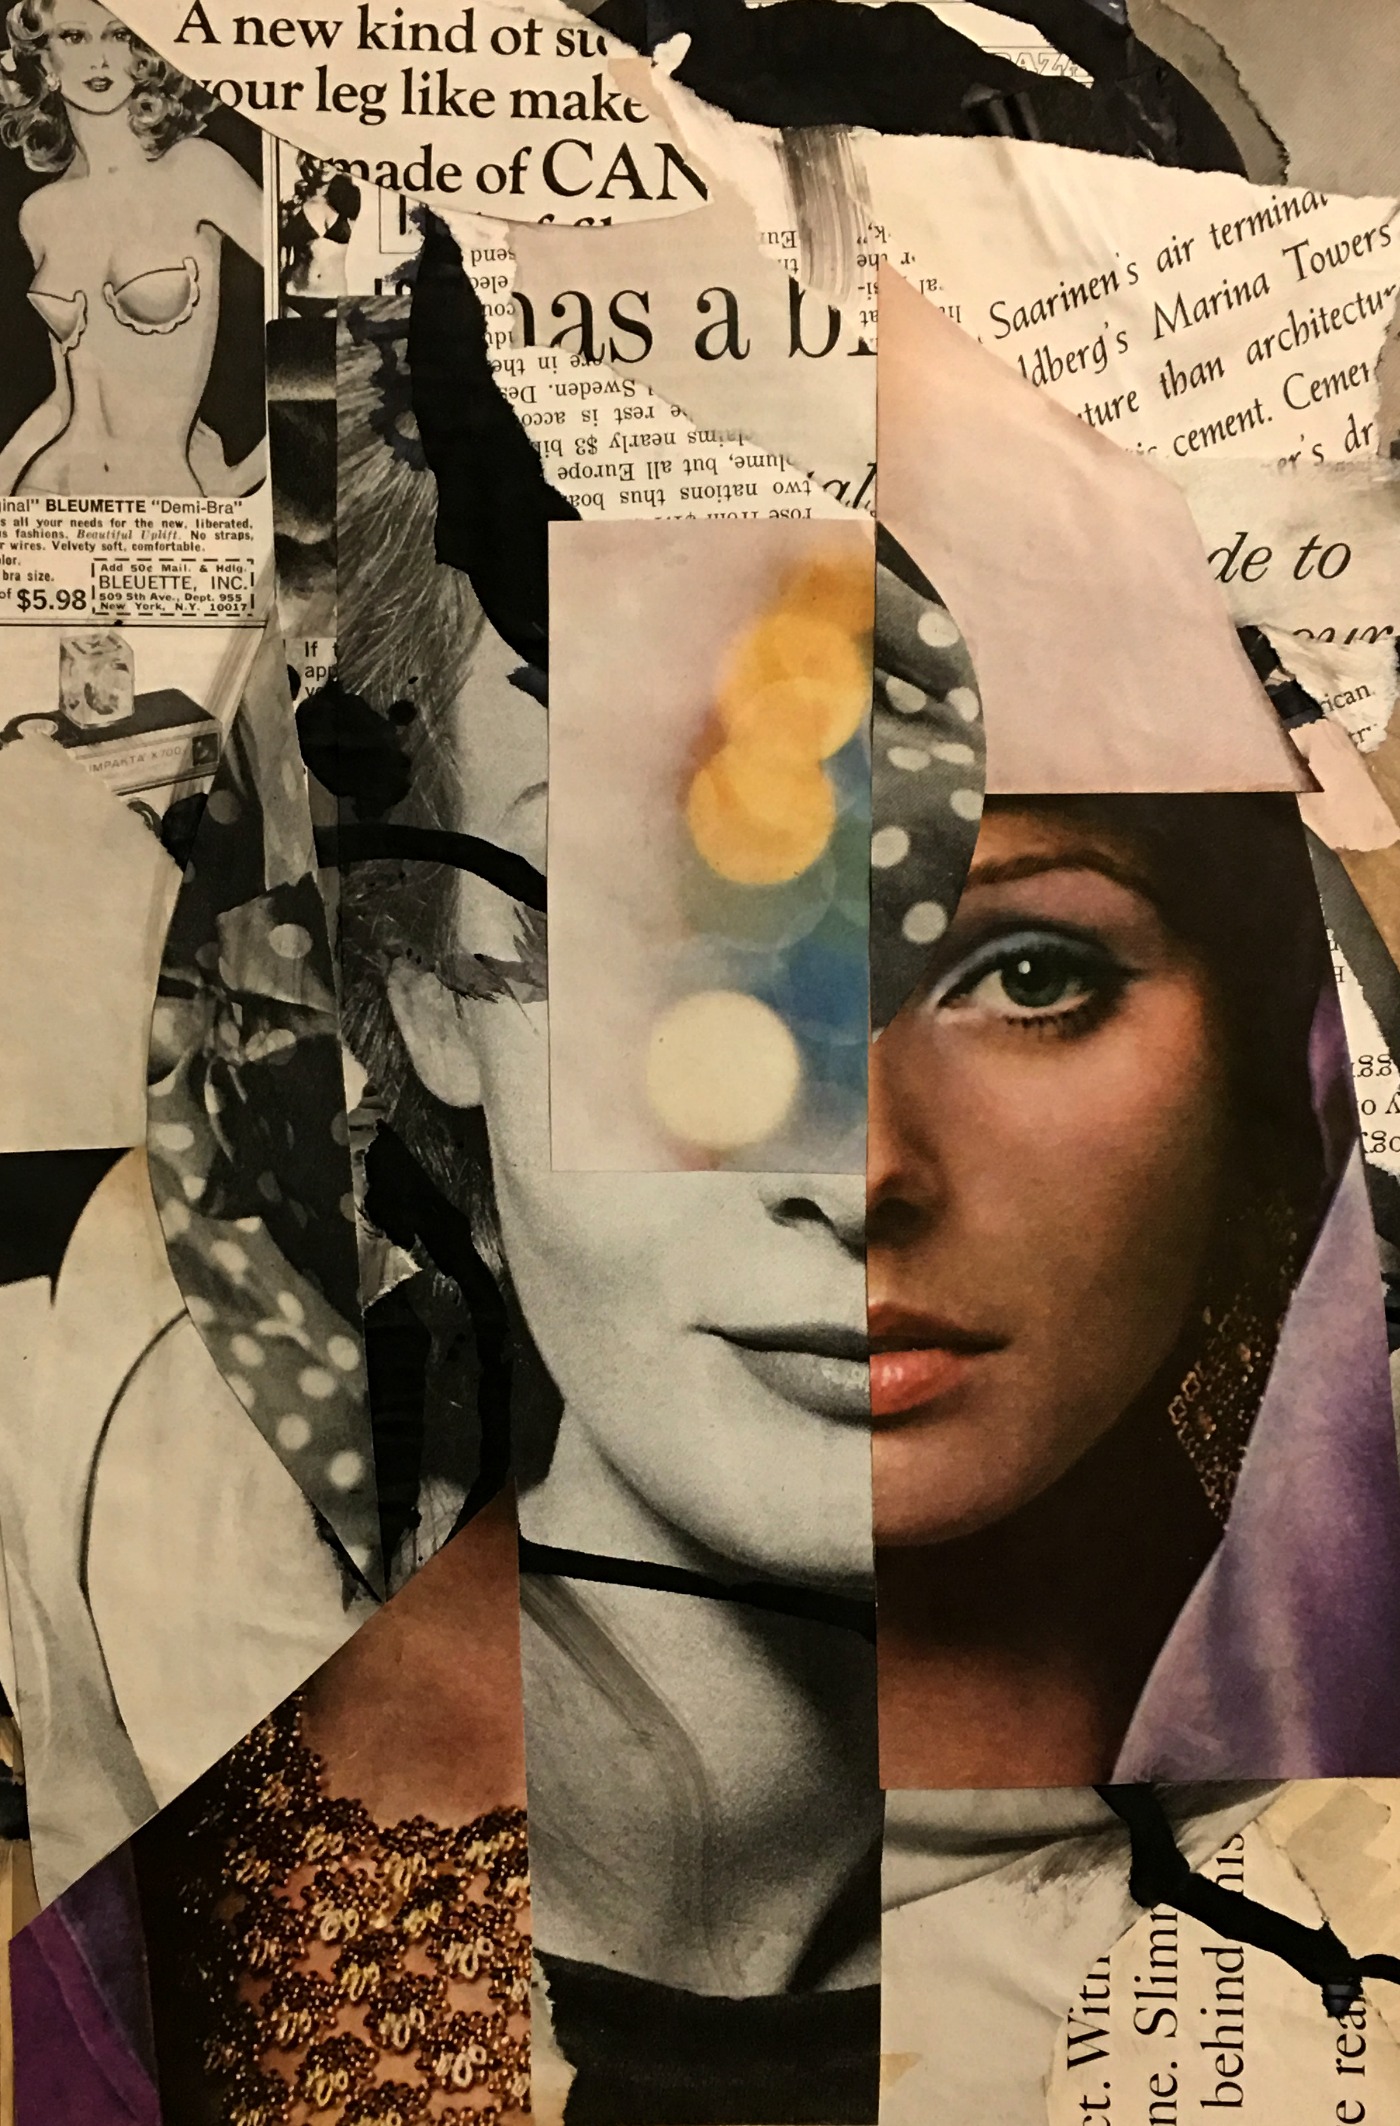 2017-2019 Mixed Media/Collage Portraits Russell C. Smith Mixed Media & Collage Artist